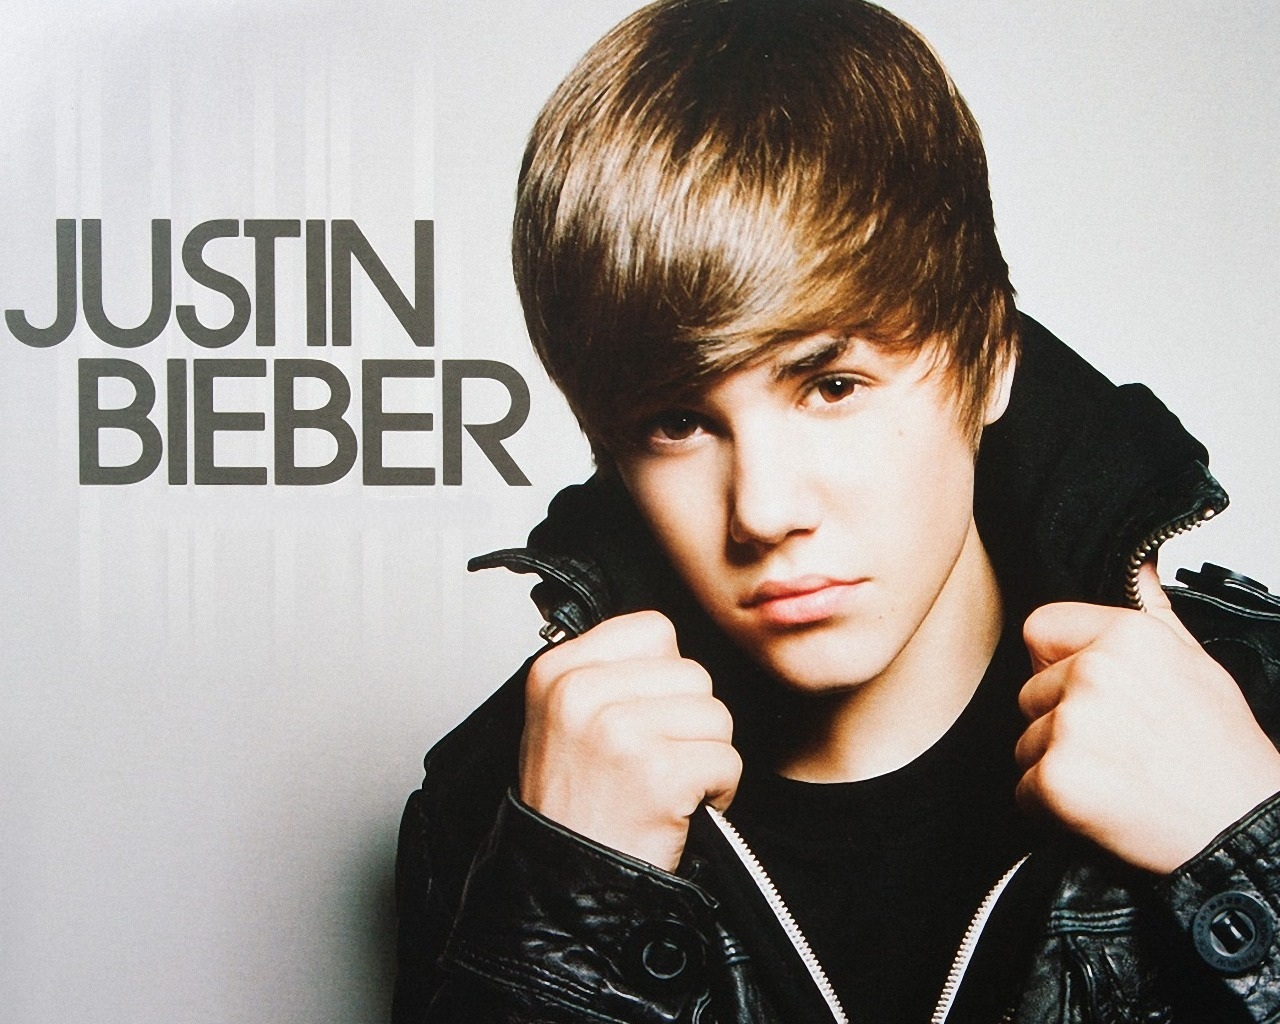 Justin Bieber HD Wallpapers for Desktop, iPhone, iPad, and Android